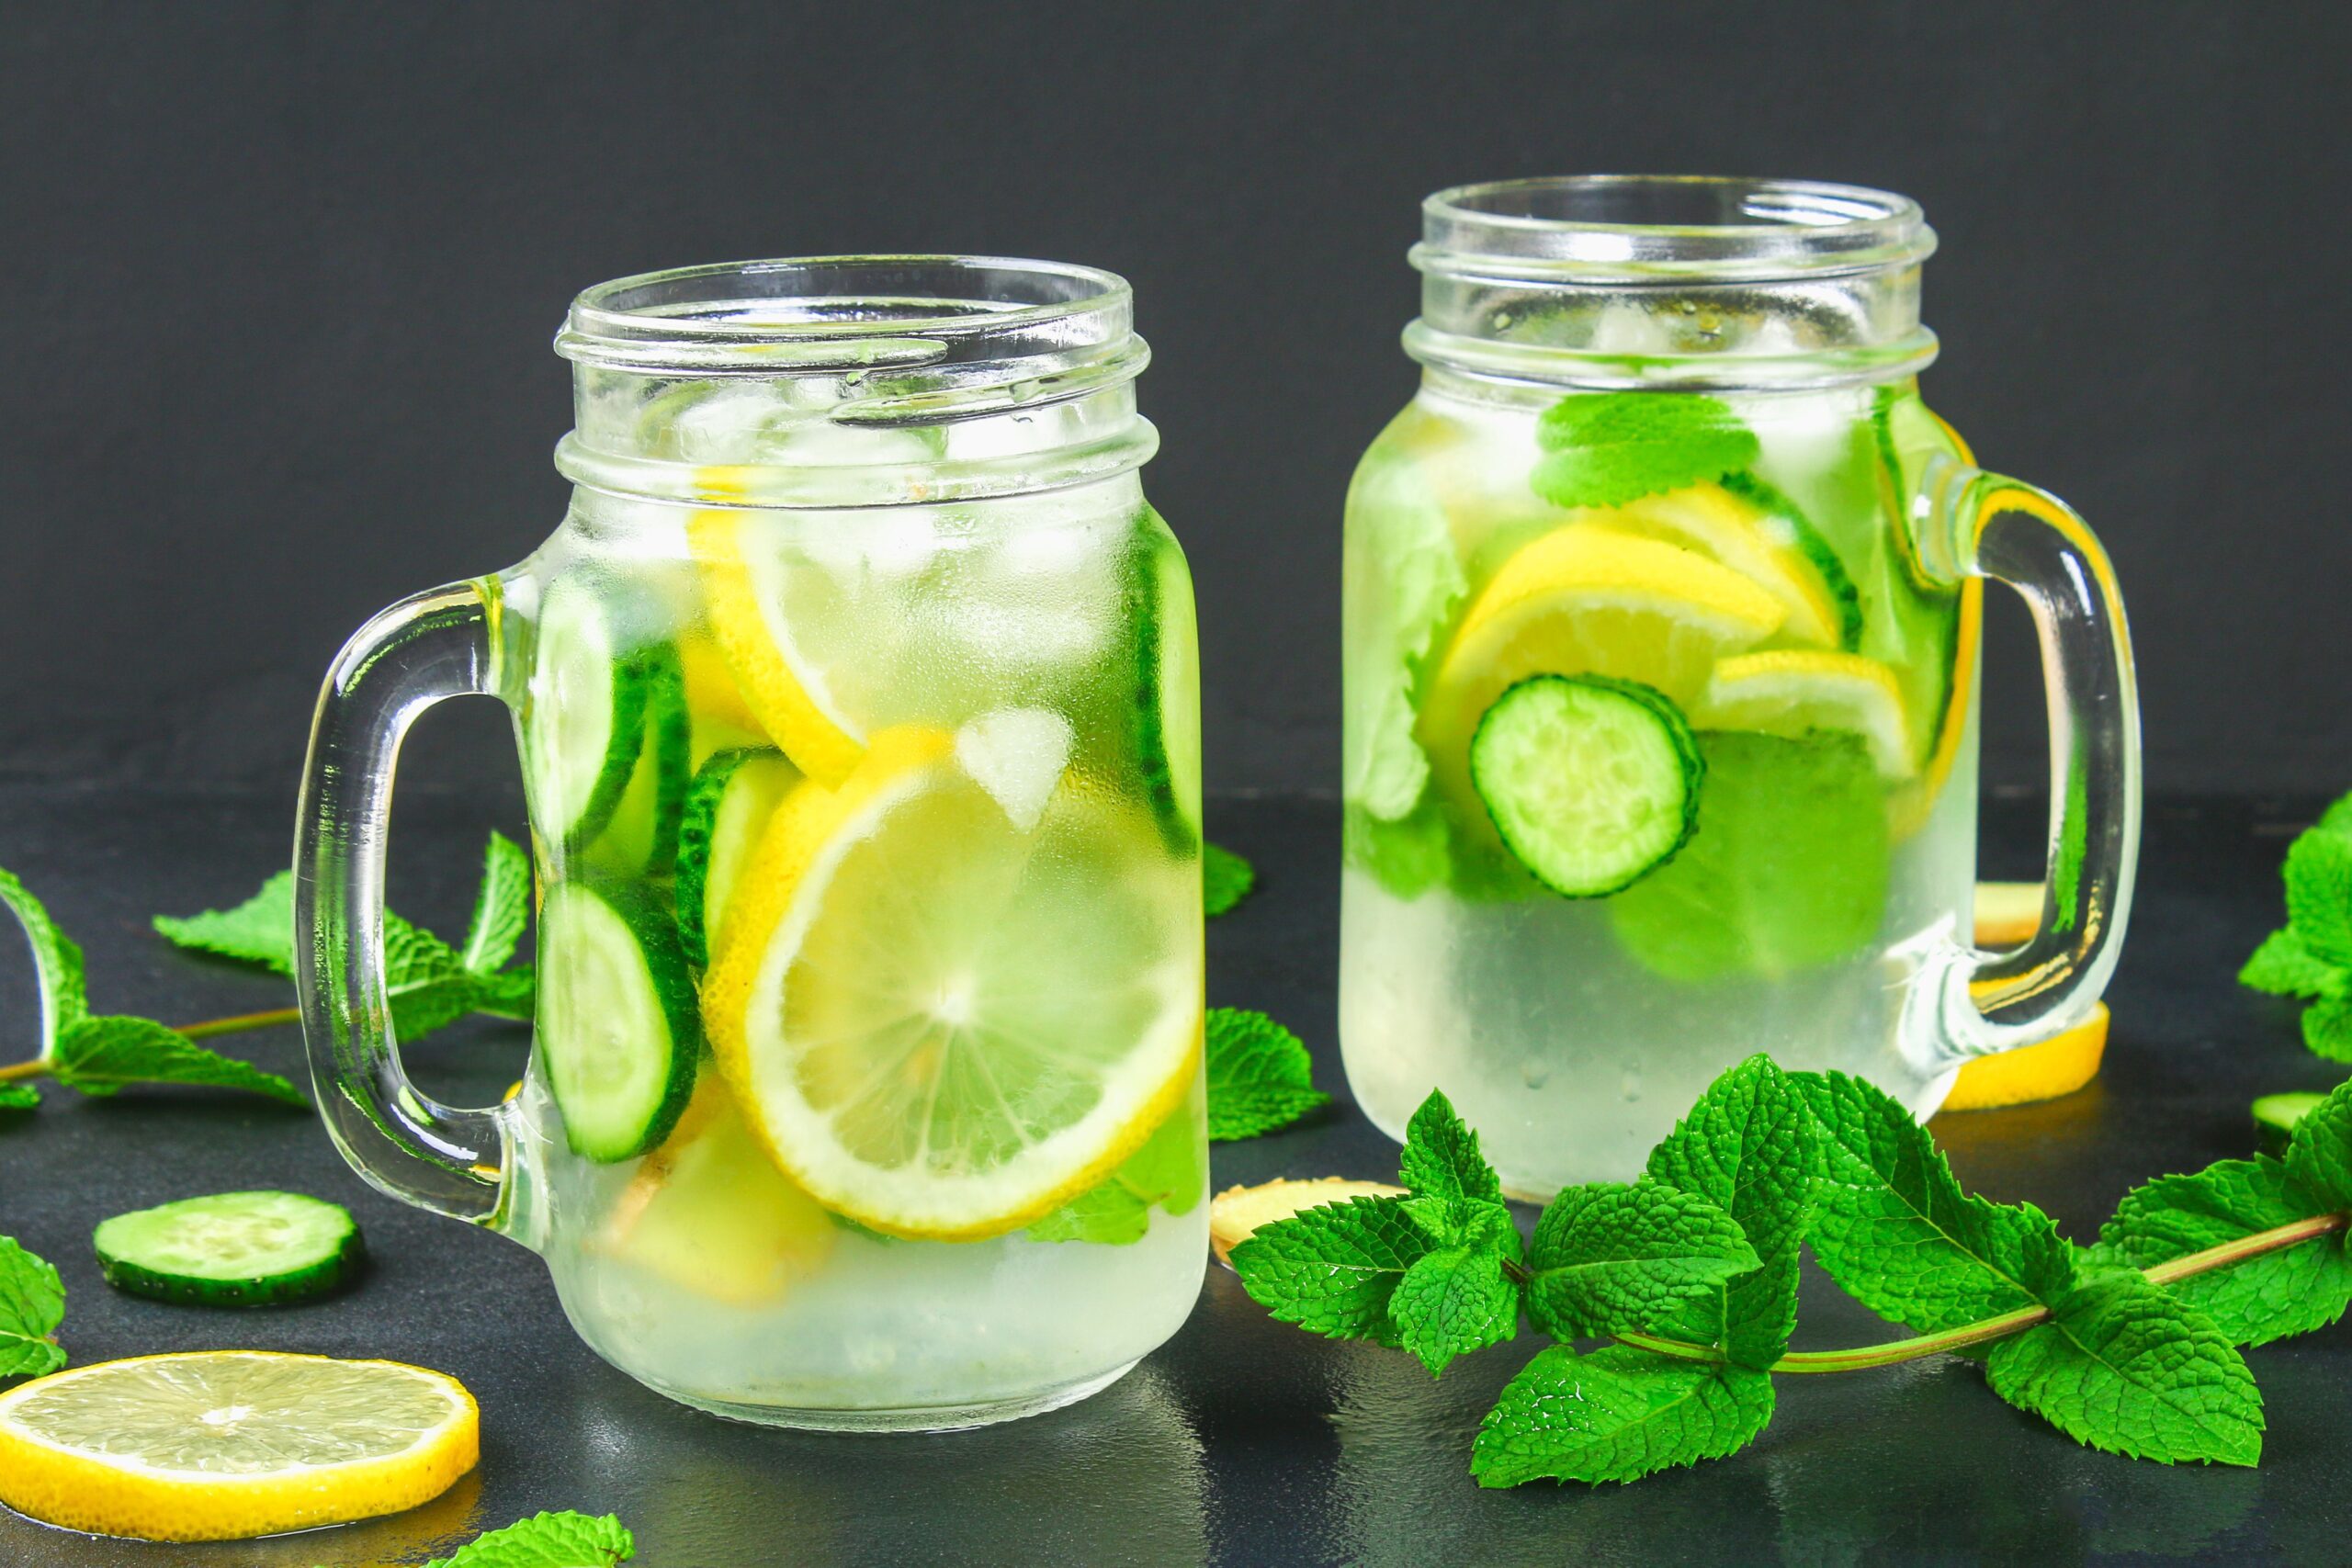 Drinking Lemon and Cucumber Water Everyday